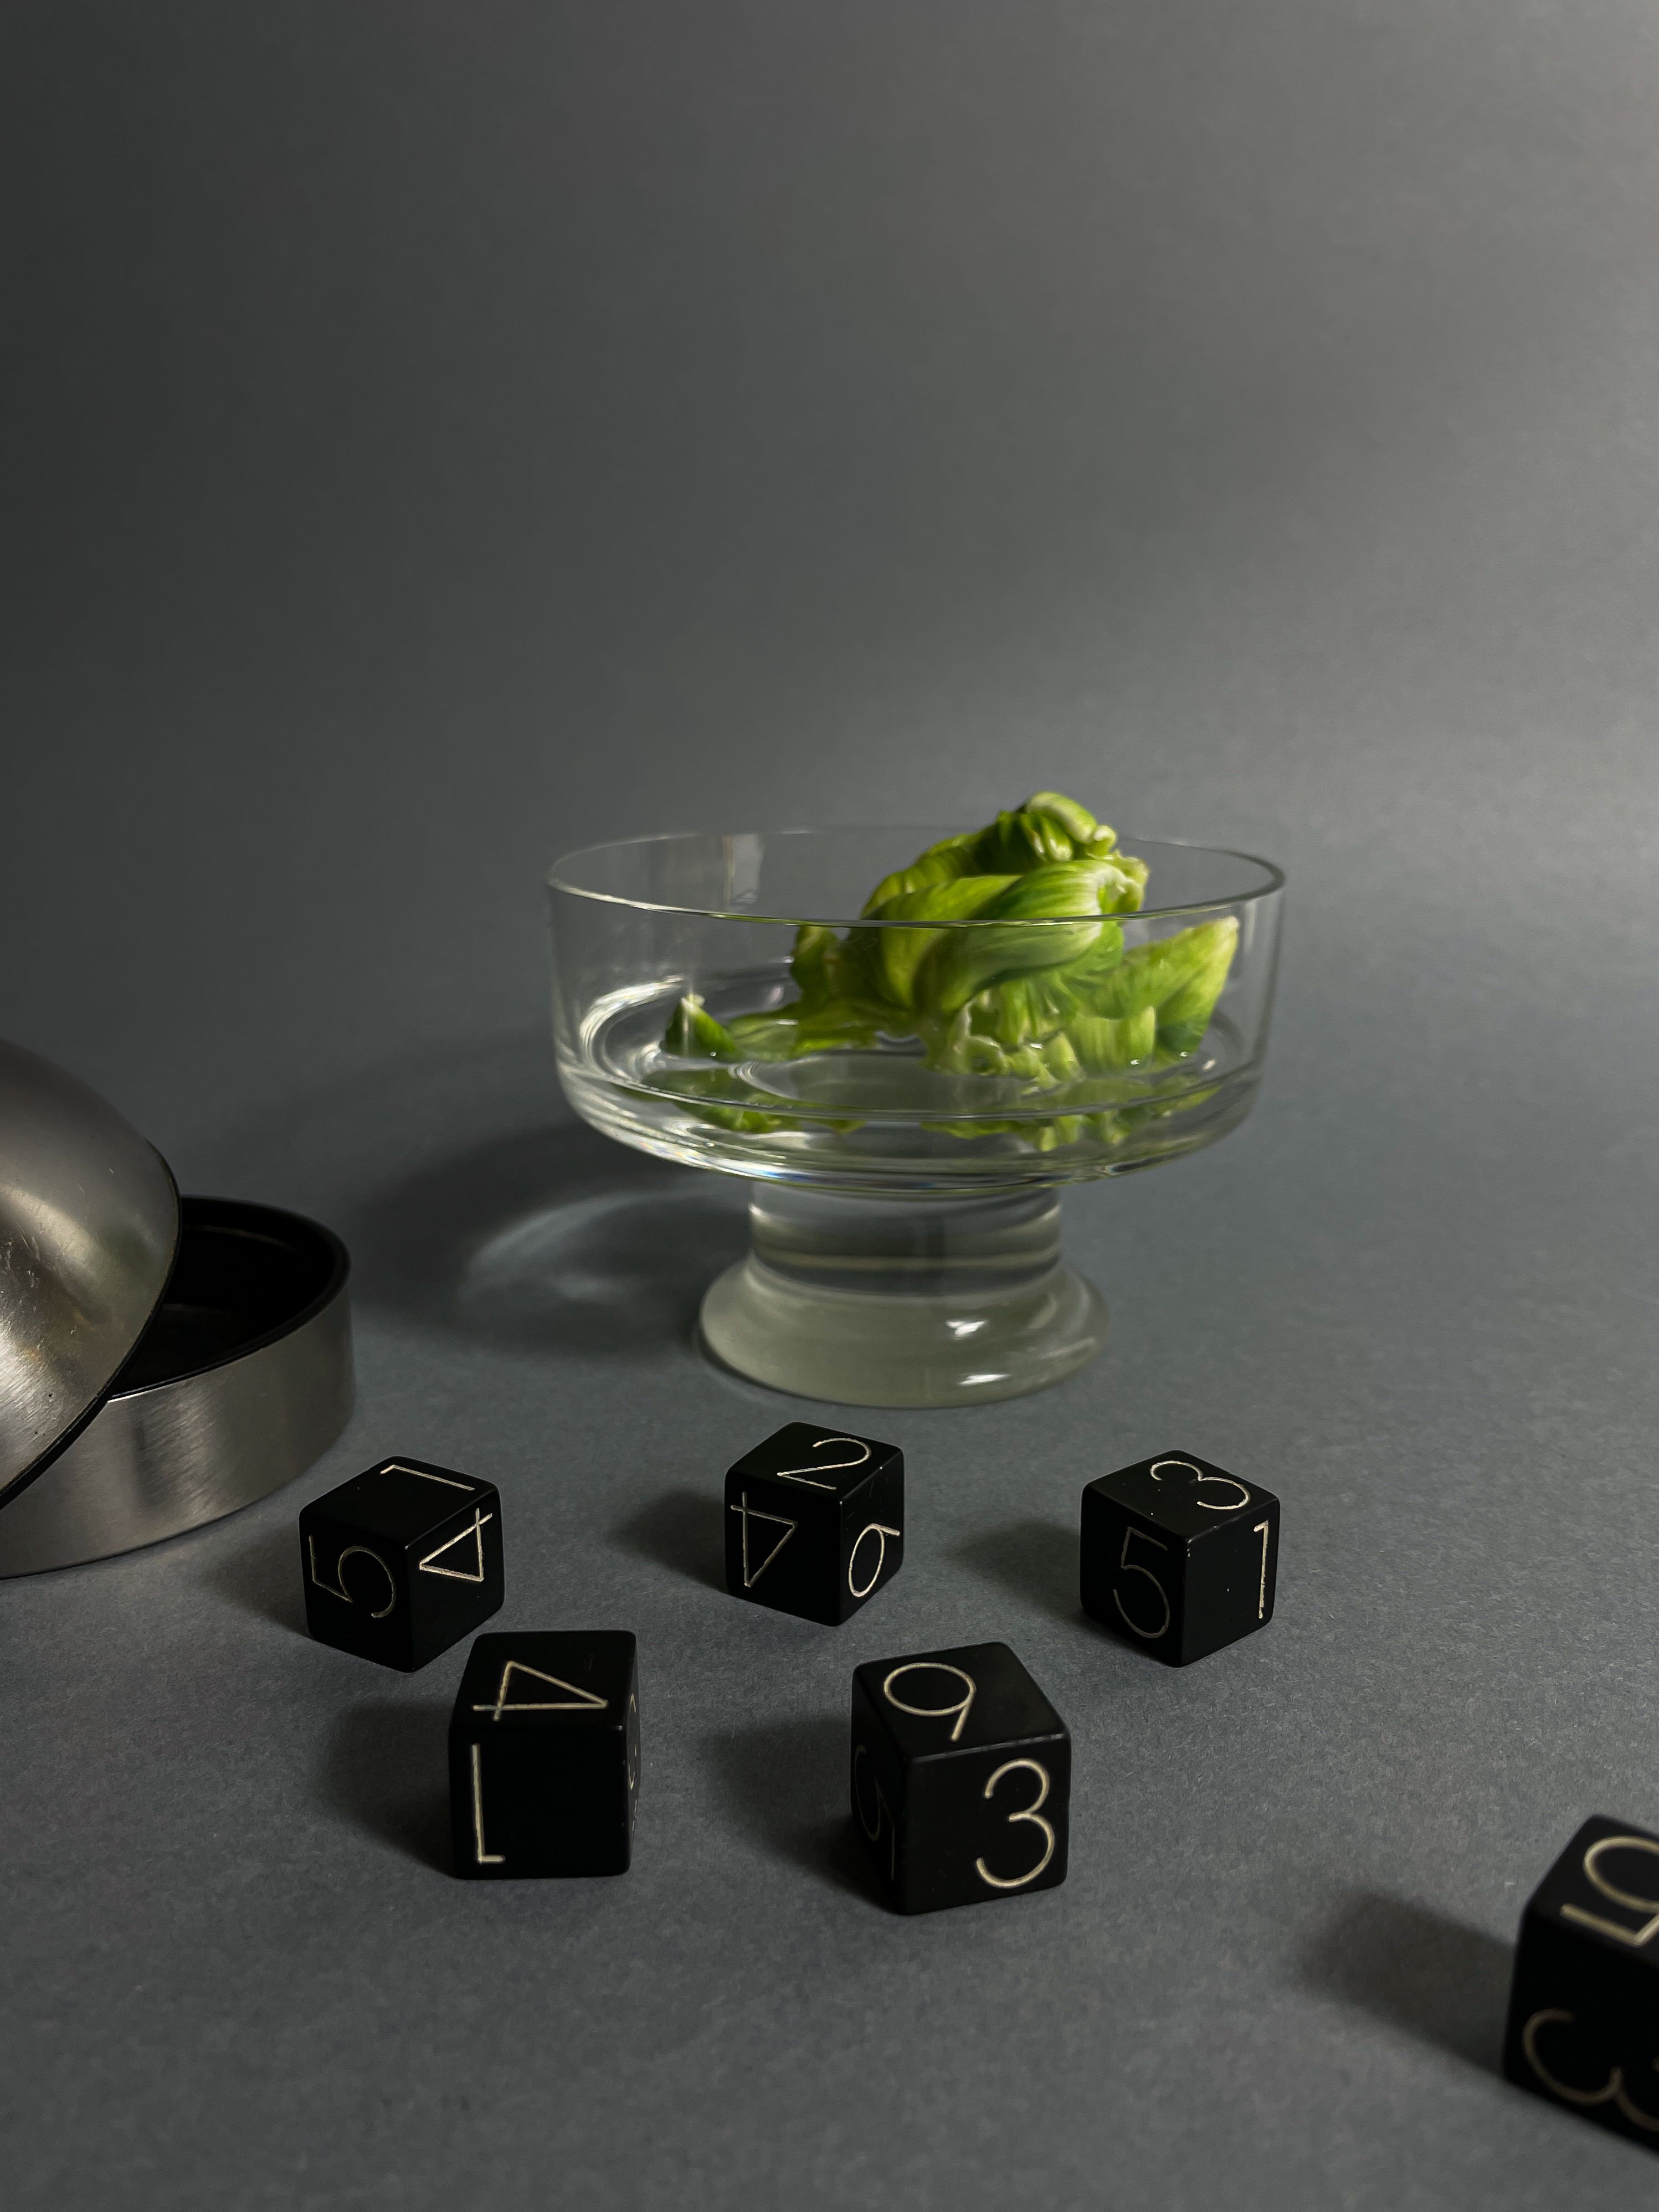 Gambling cubes with a glass of water, containing a parrot tulip